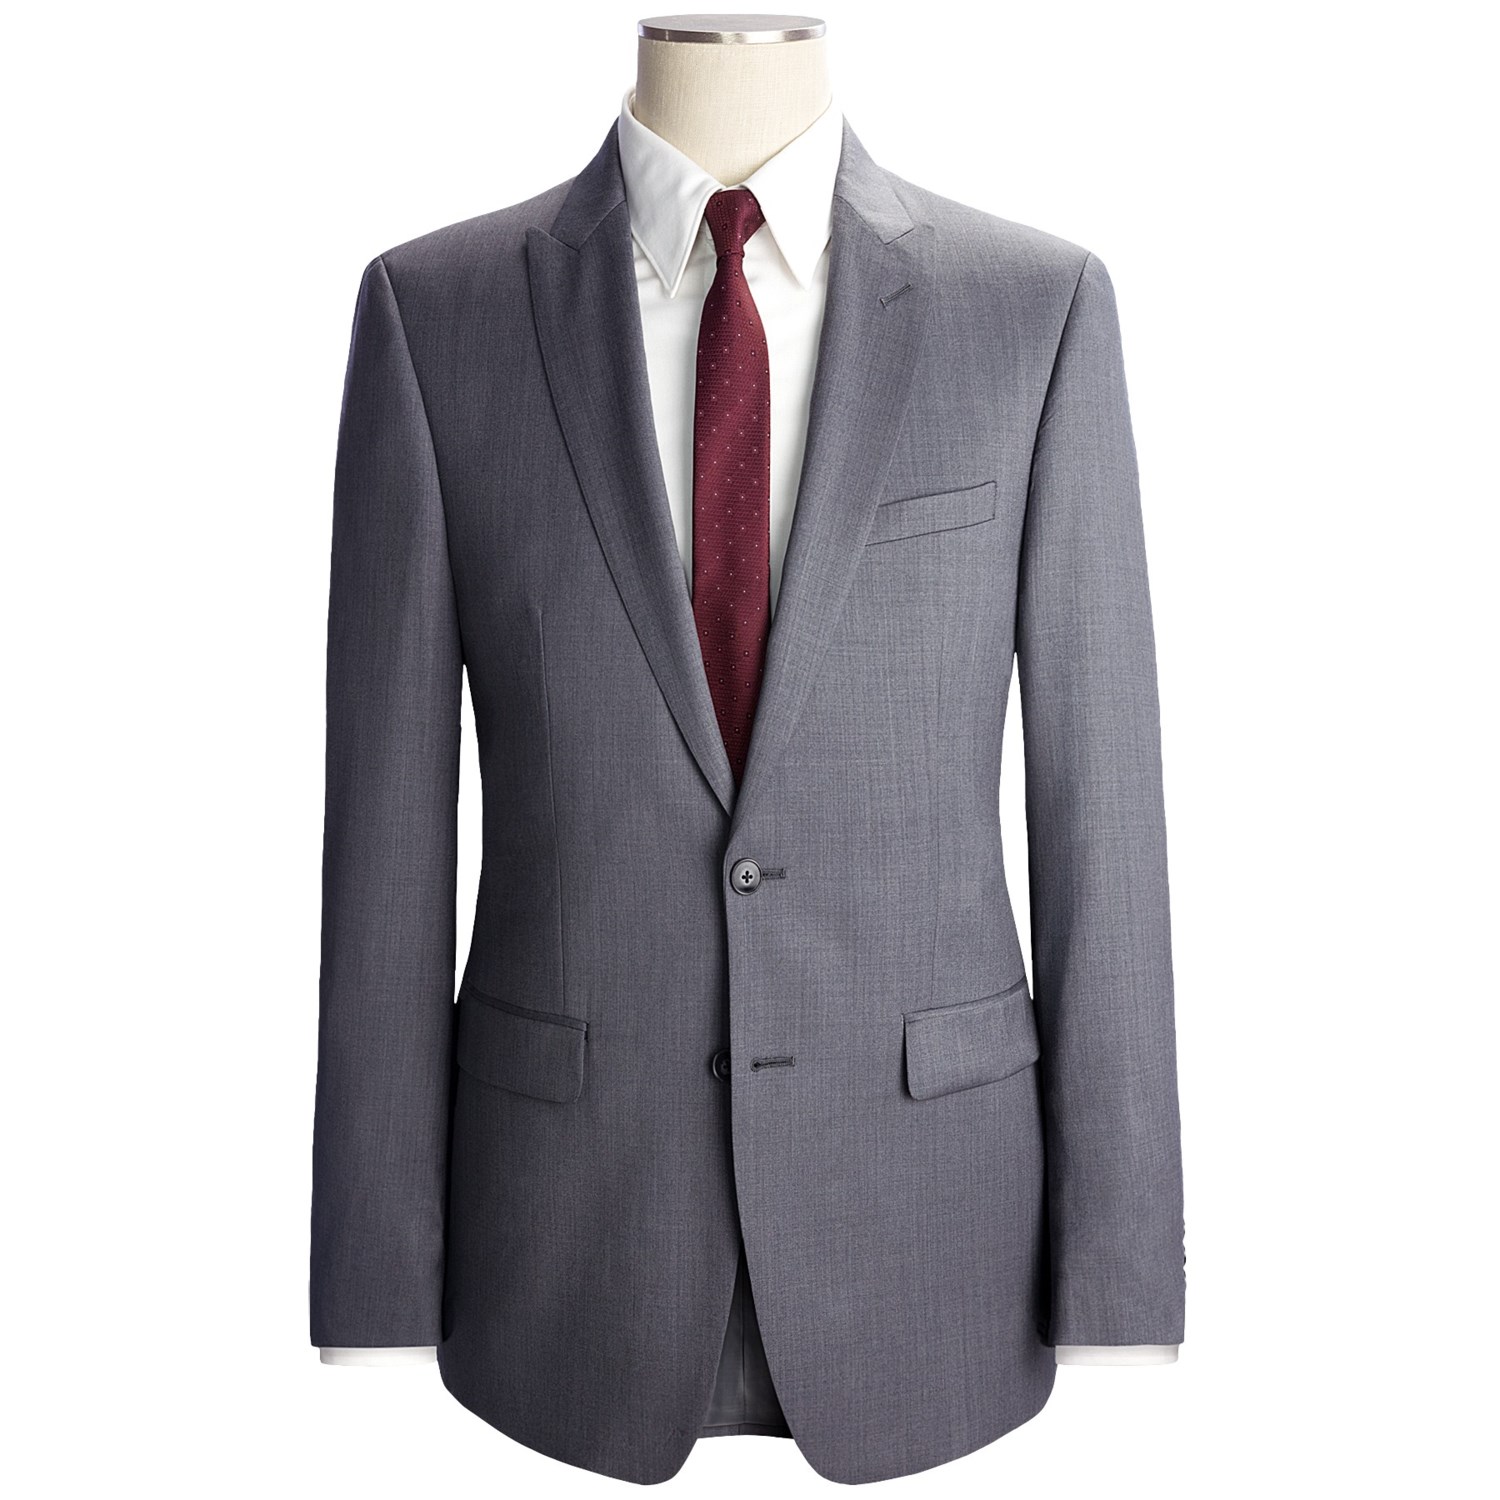 Calvin Klein Fancy Solid Suit - Extreme Slim Fit, Wool (For Men) - Save 77%